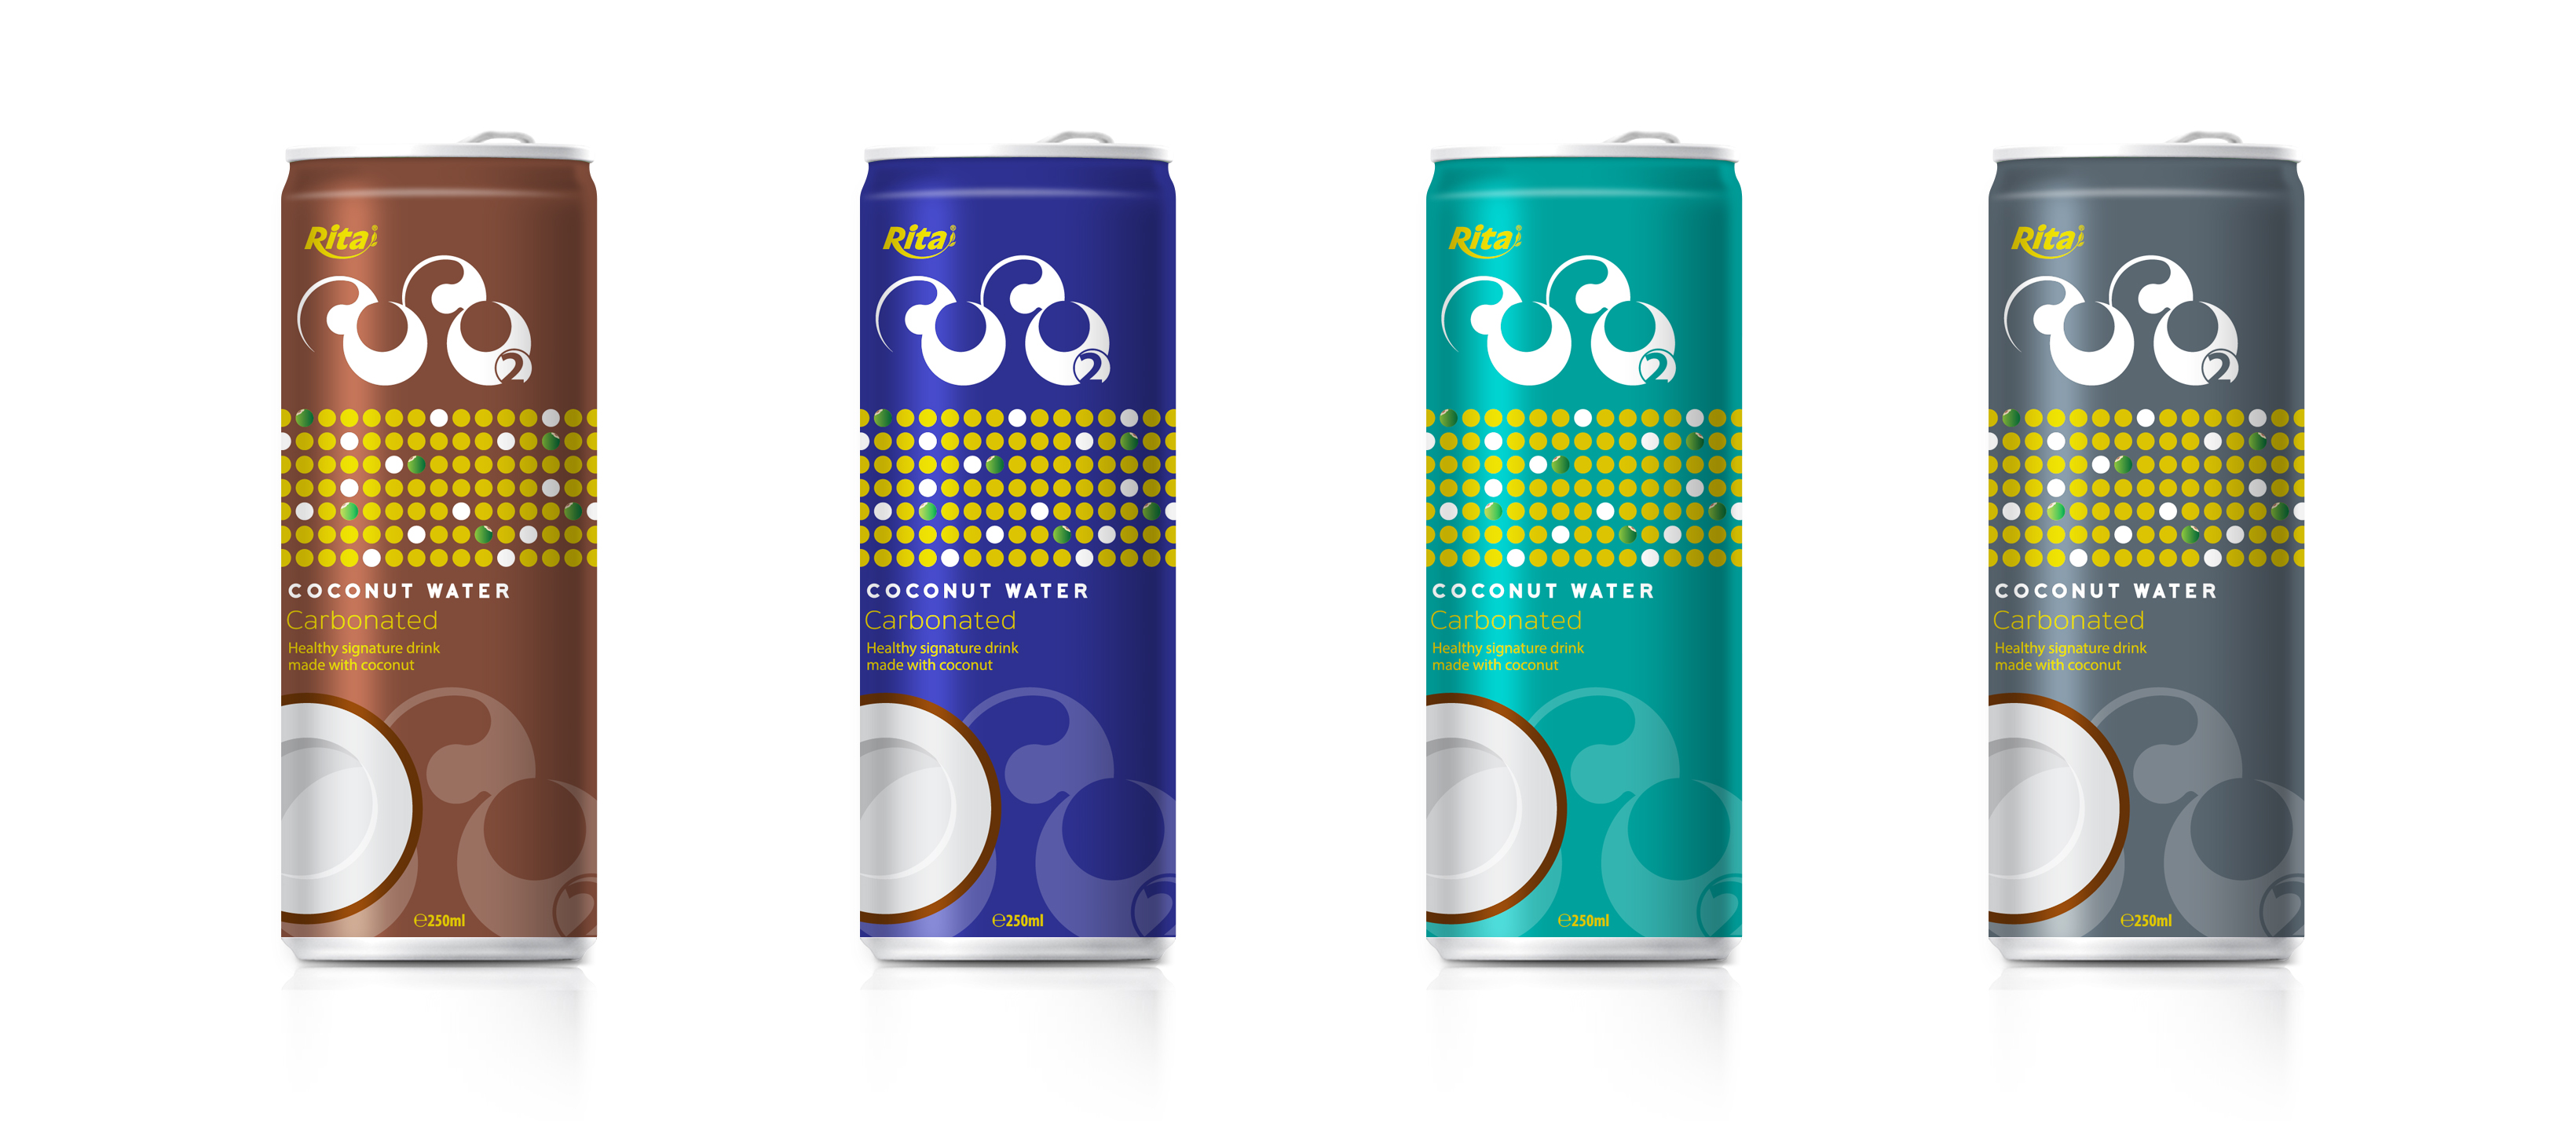 Carbonated coconut water 330 ml Canned Brand